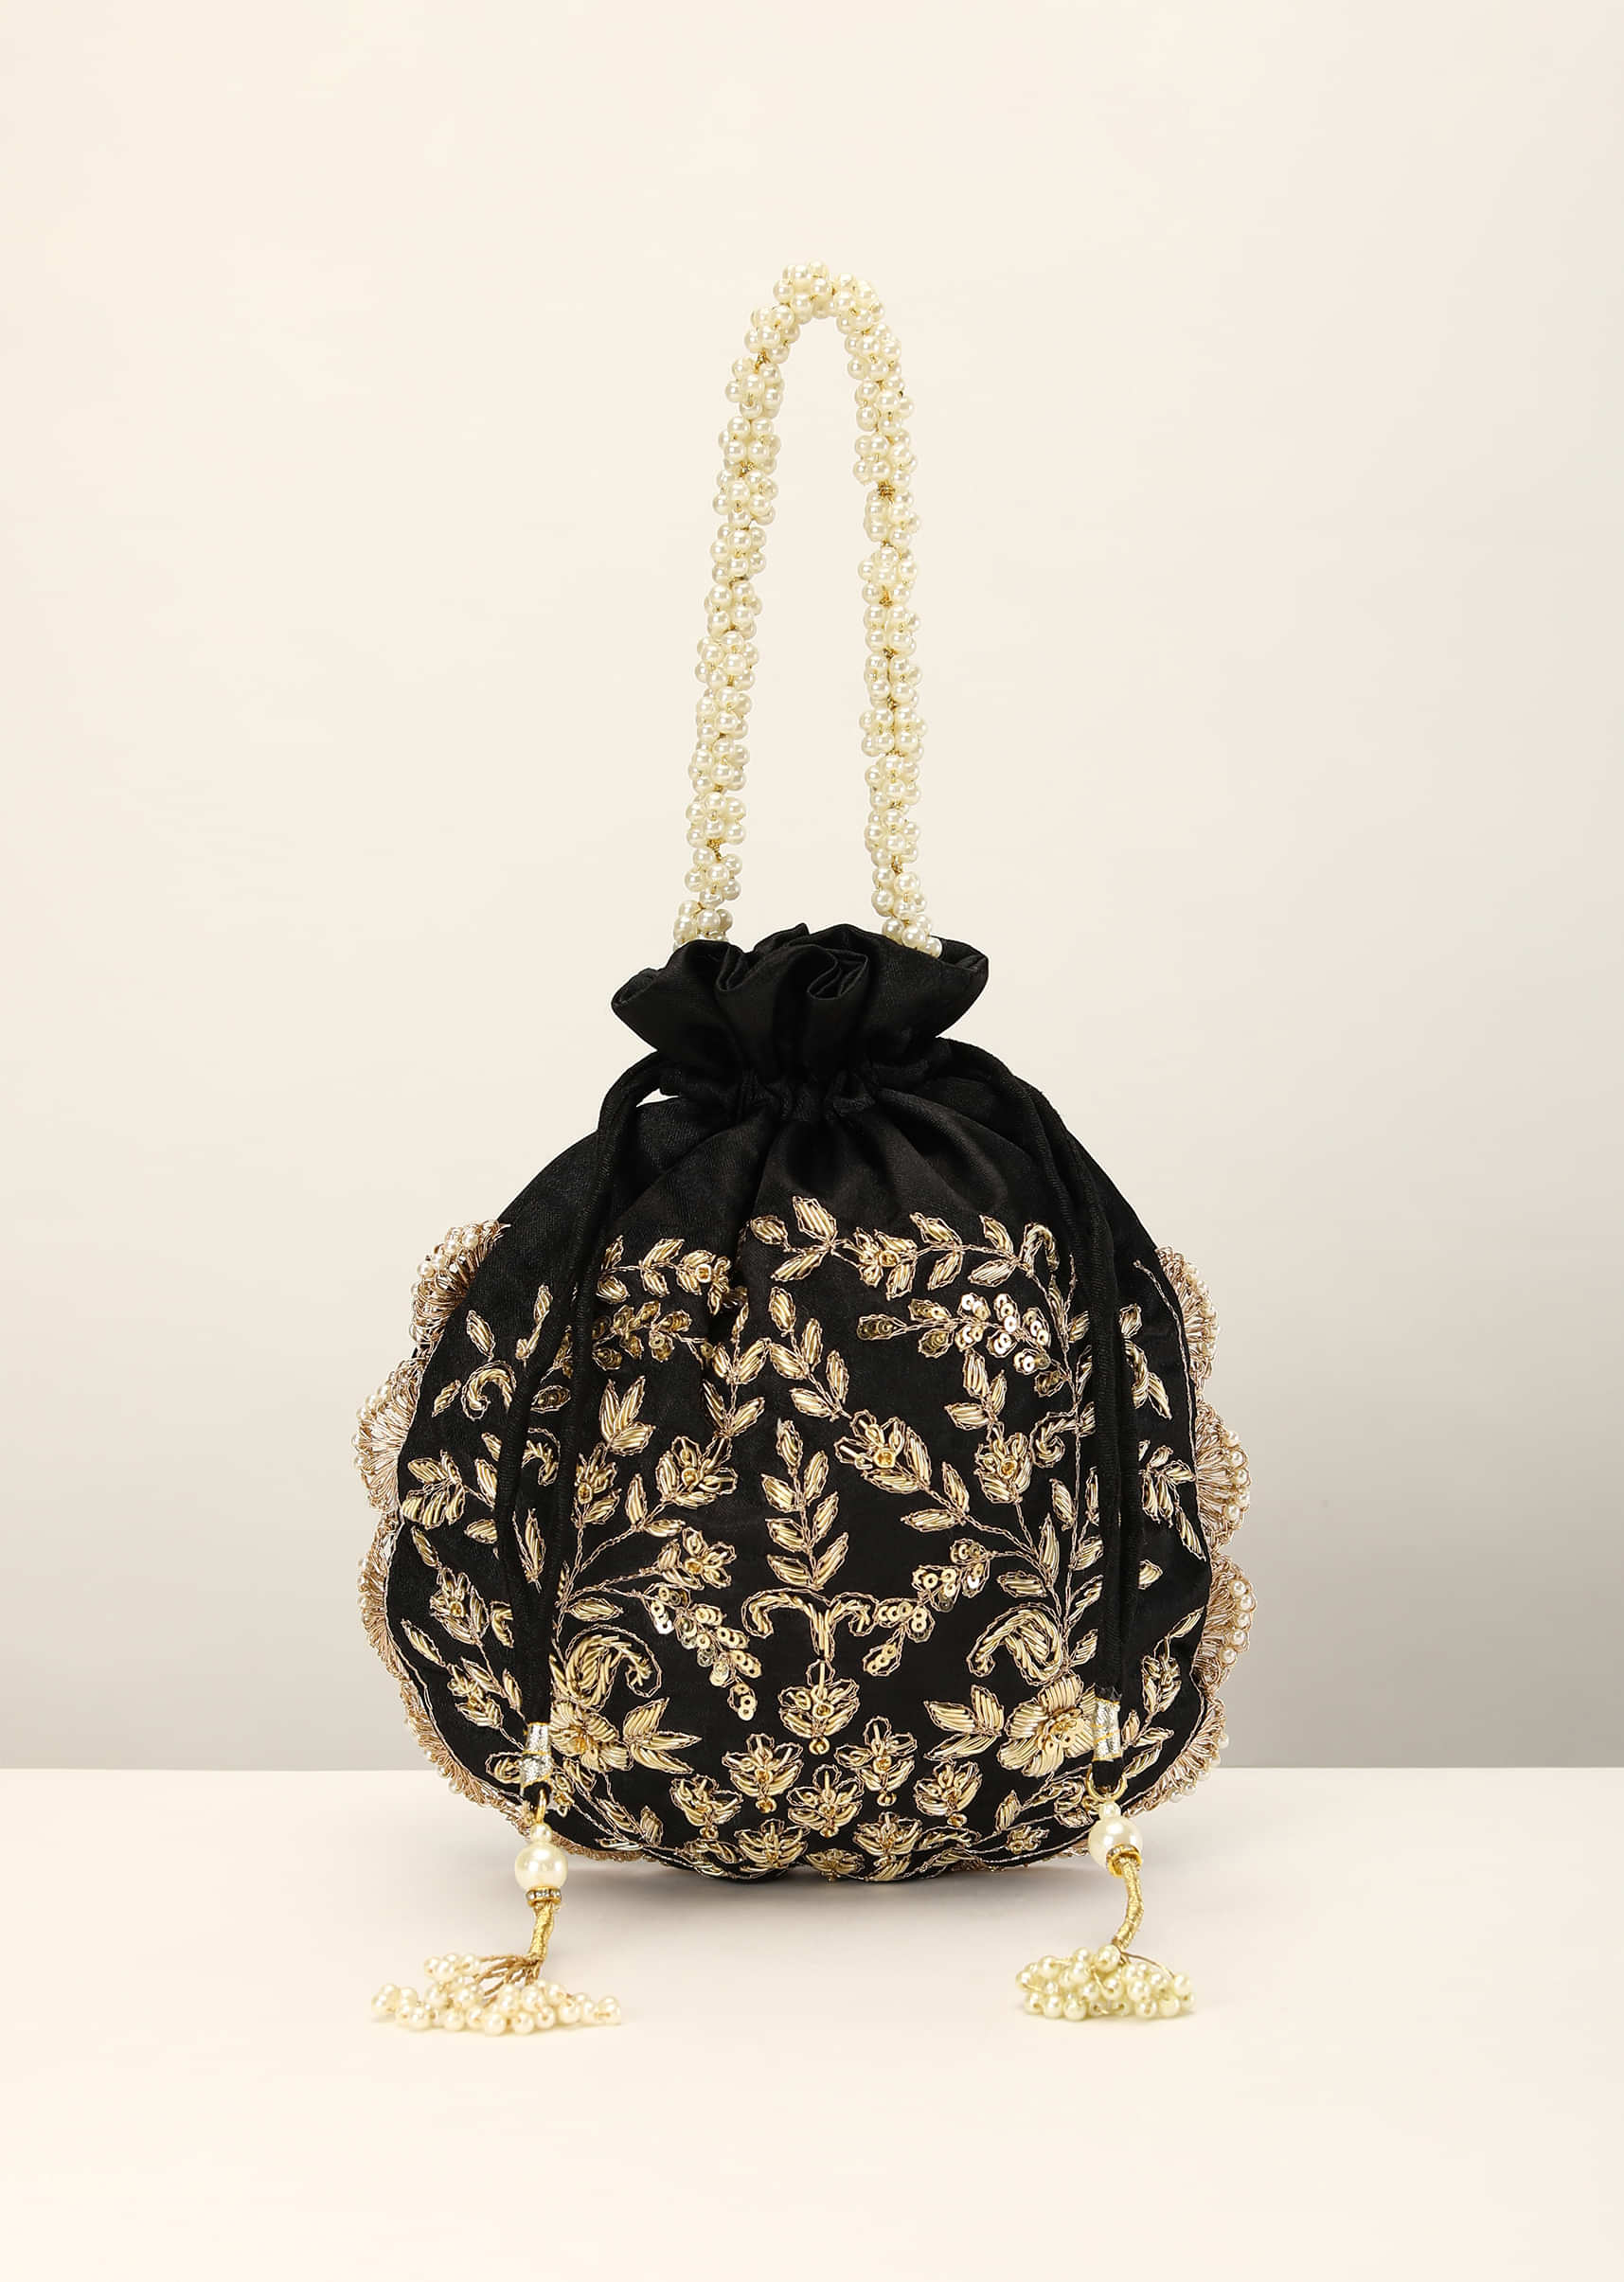 Black Potli In Satin With Hand Embroidery Detailing Using Zardosi Work In Floral Design All Over